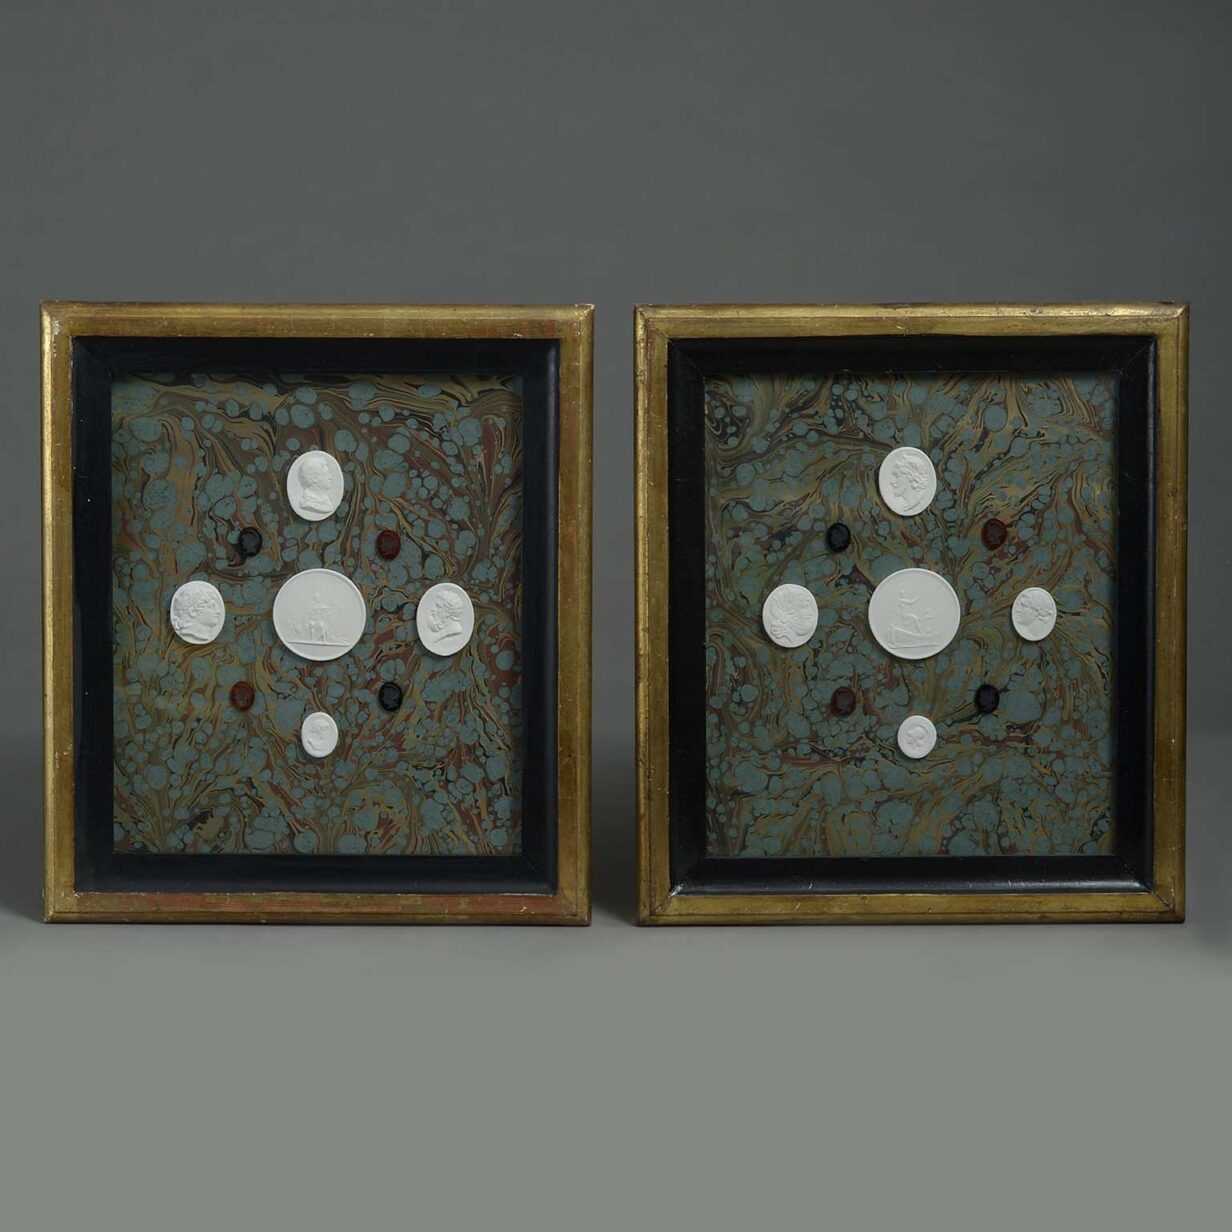 Pair of framed intaglio groups